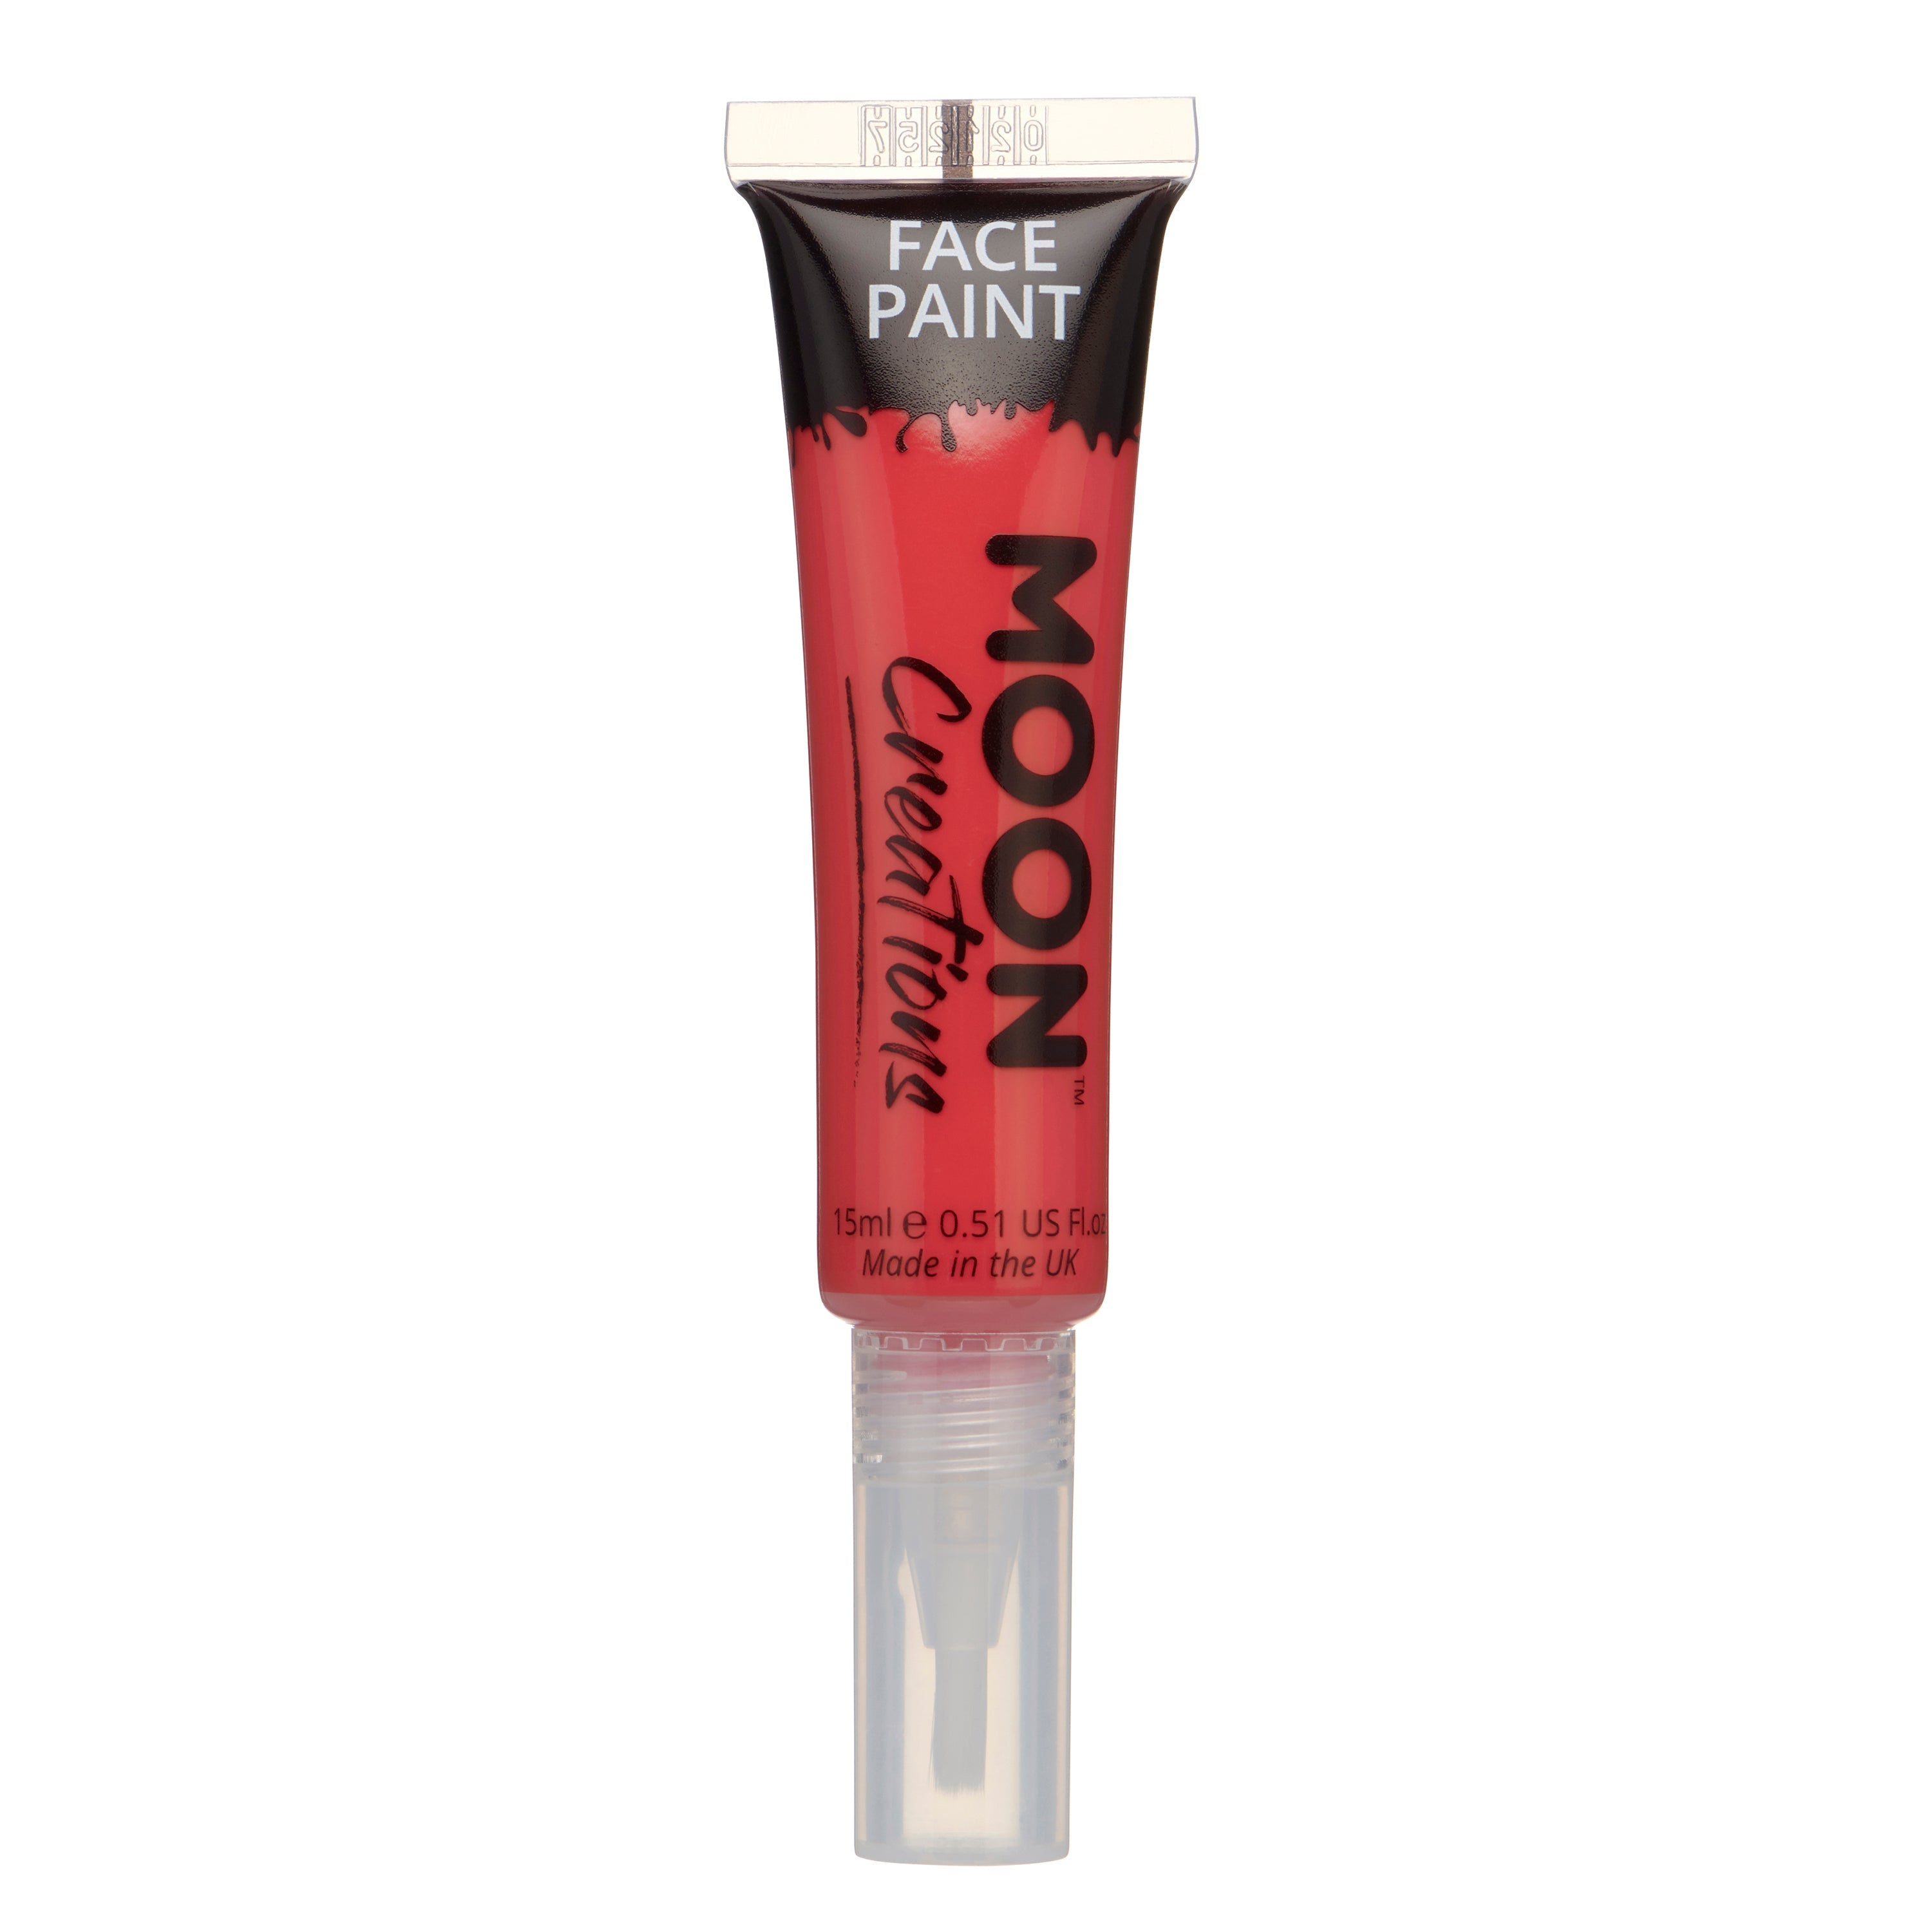 Red - Face & Body Paint Makeup w/brush, 15mL. Cosmetically certified, FDA & Health Canada compliant, cruelty free and vegan.